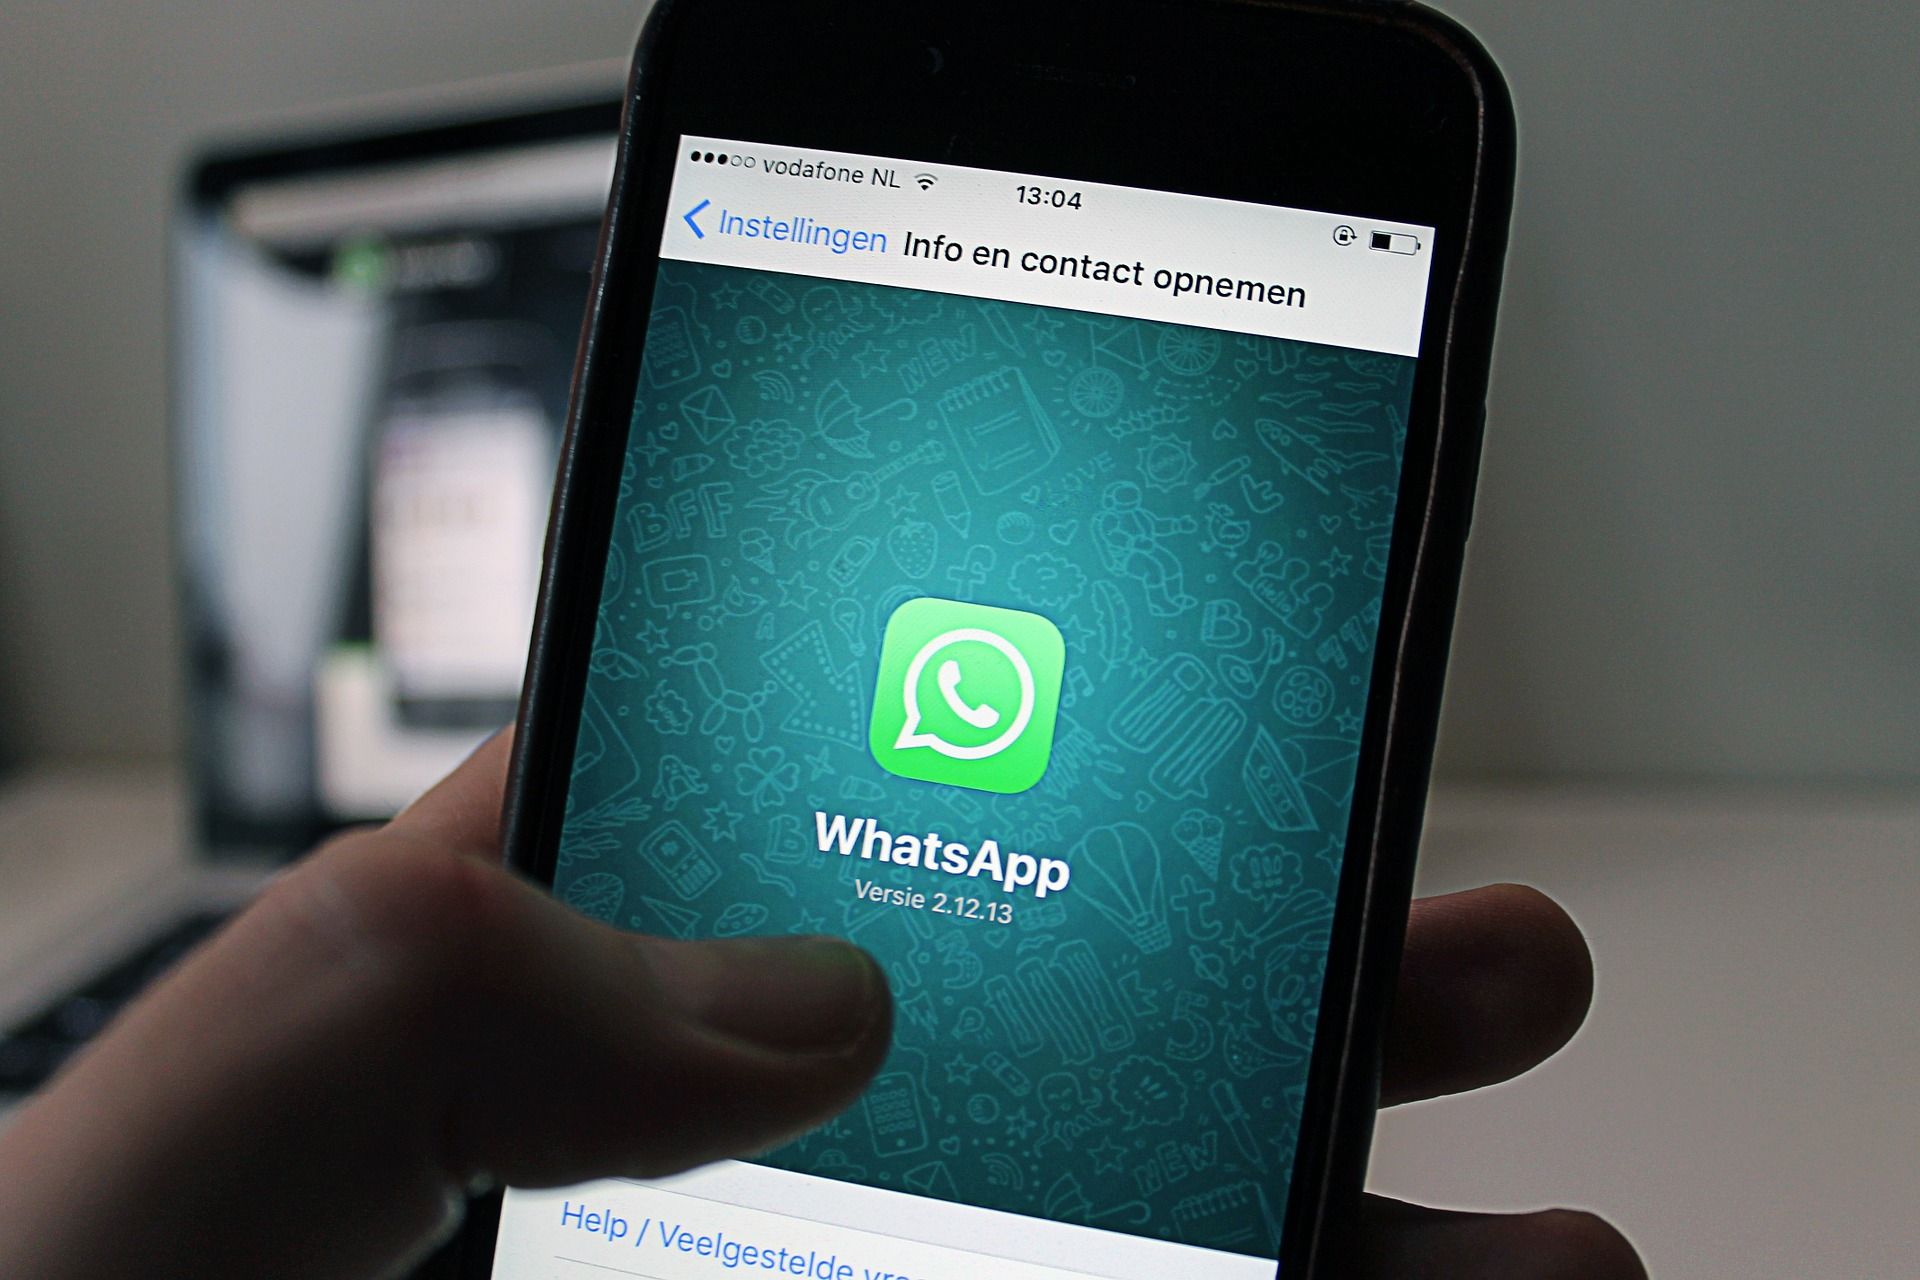 Flash calls, message level reporting: WhatsApp’s new features for Indian users